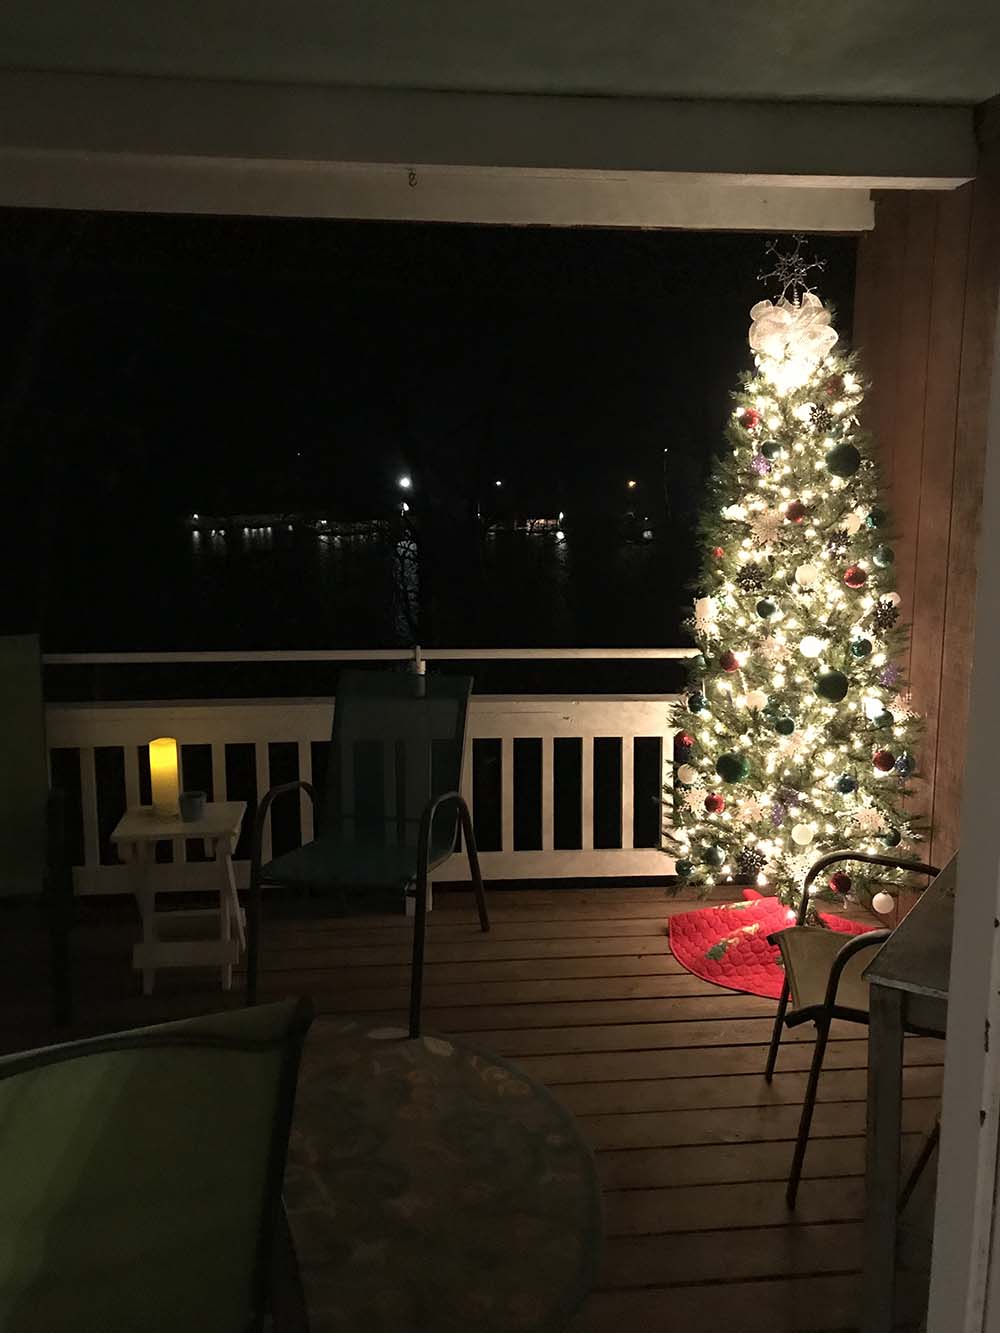 Christmas at the cottage... Marina is in the background.